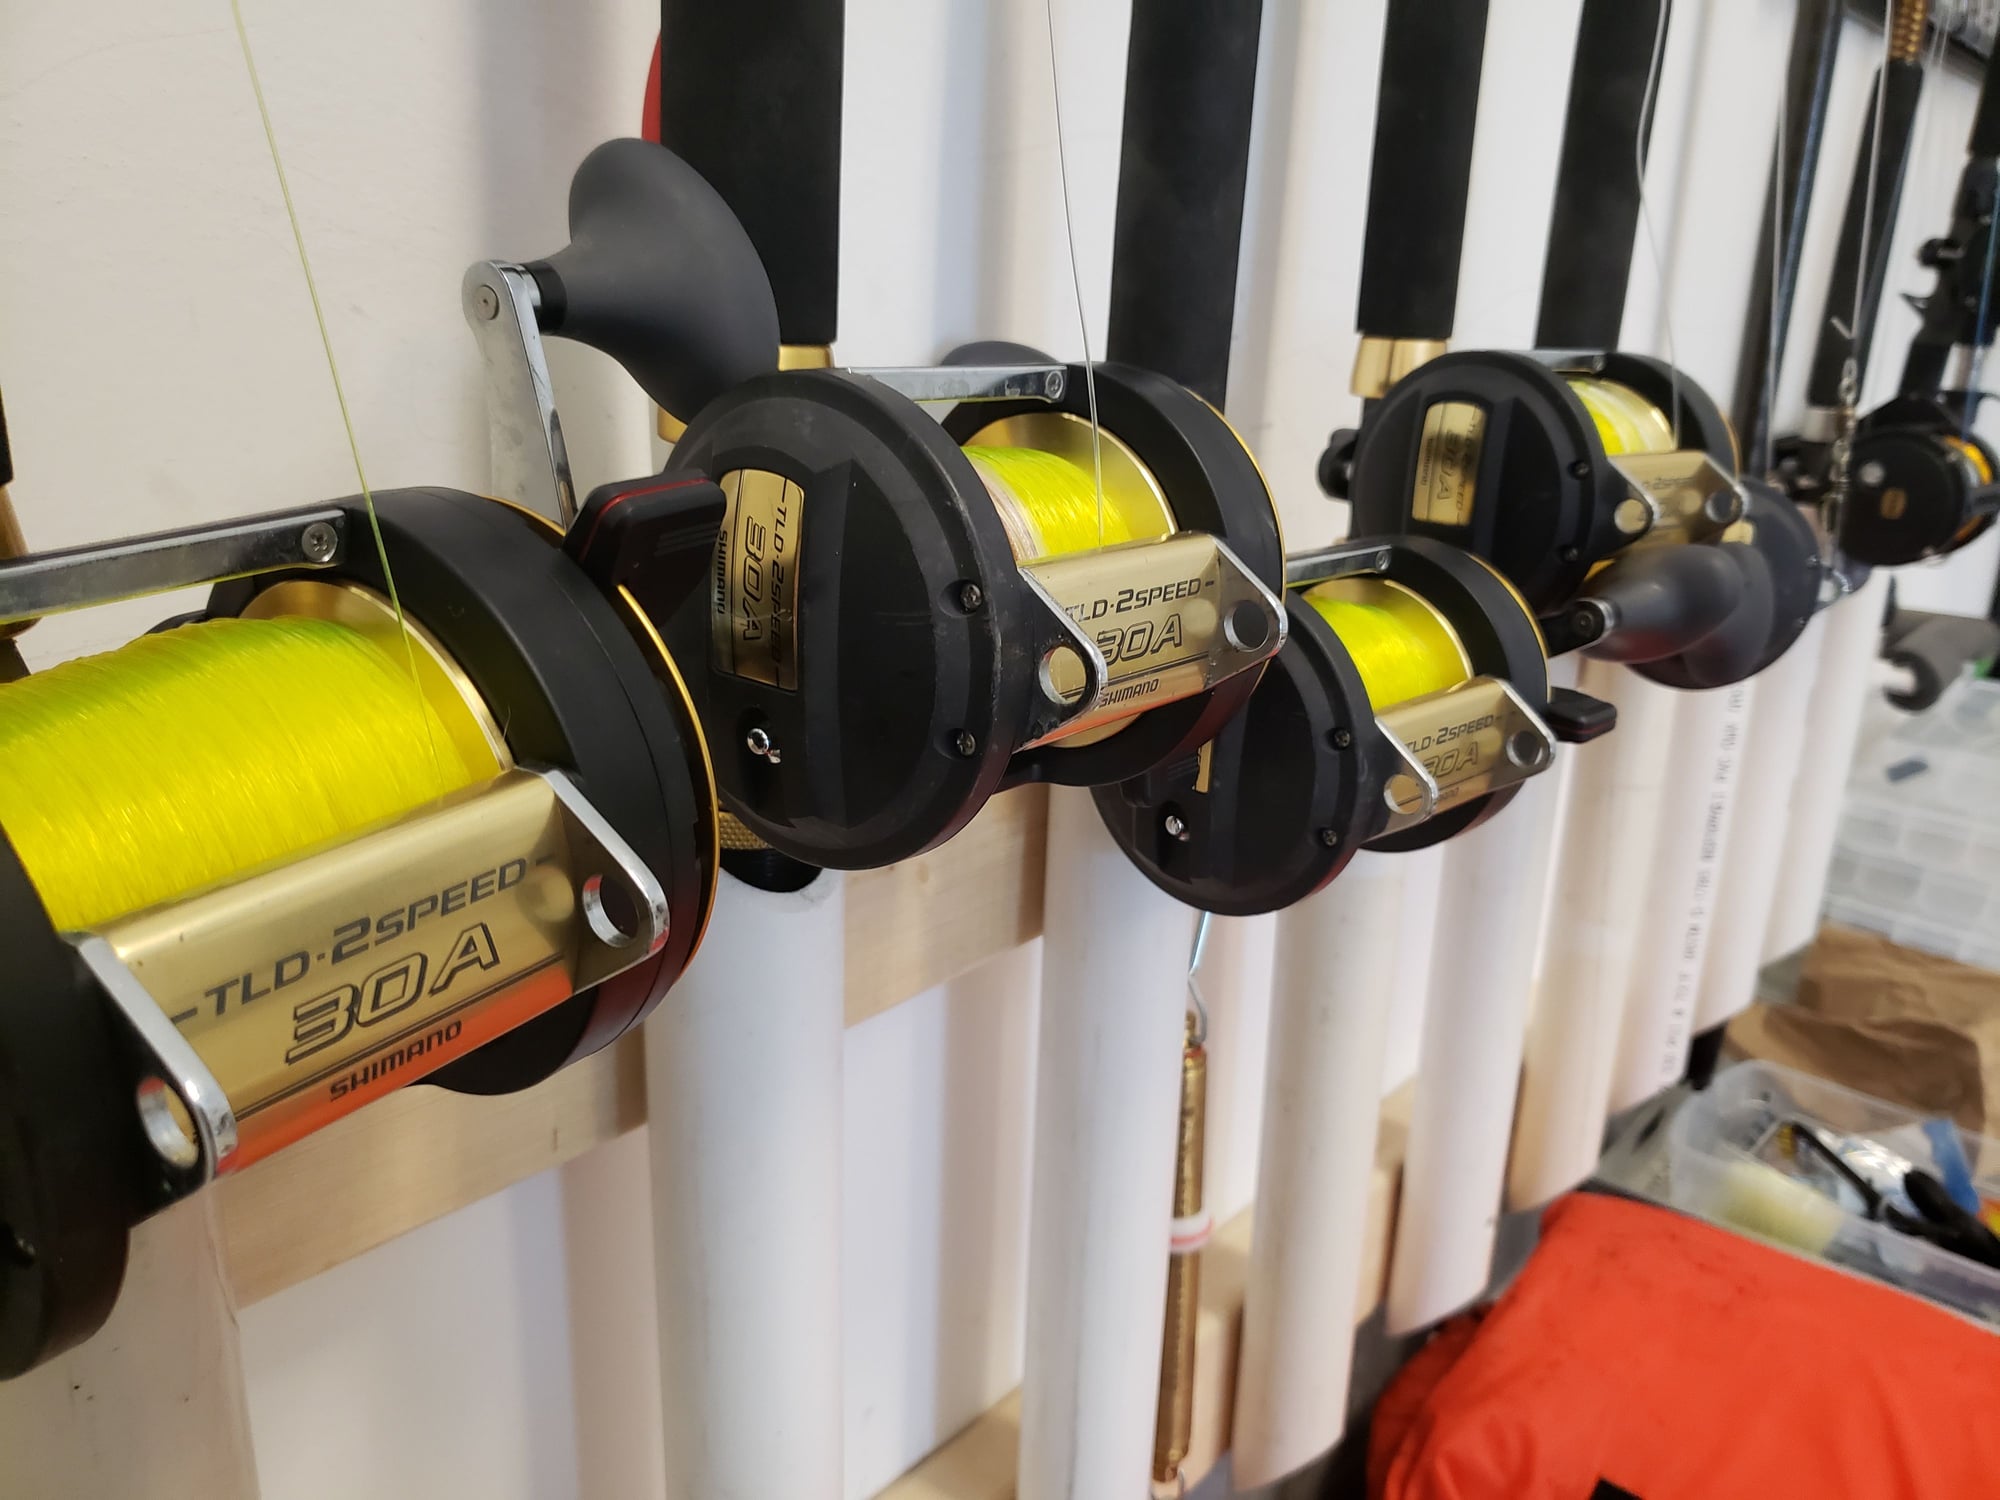 2 shimano tiagra 130 2 speed reels - The Hull Truth - Boating and Fishing  Forum